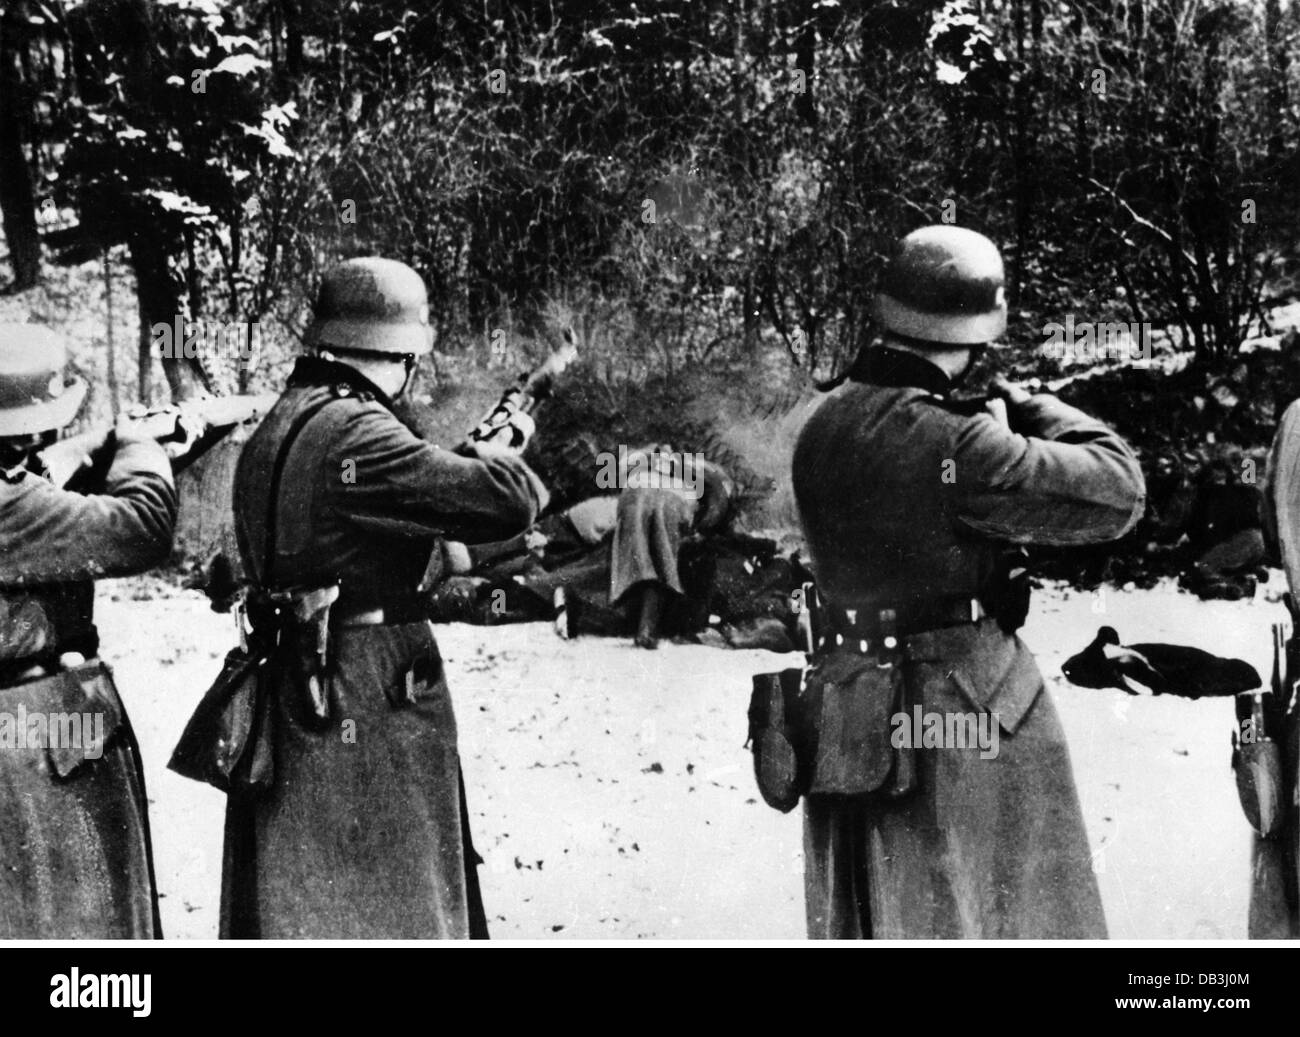 events, Second World War / WWII, Poland, German occupation, execution of Poles by Germans, circa 1942, Additional-Rights-Clearences-Not Available Stock Photo